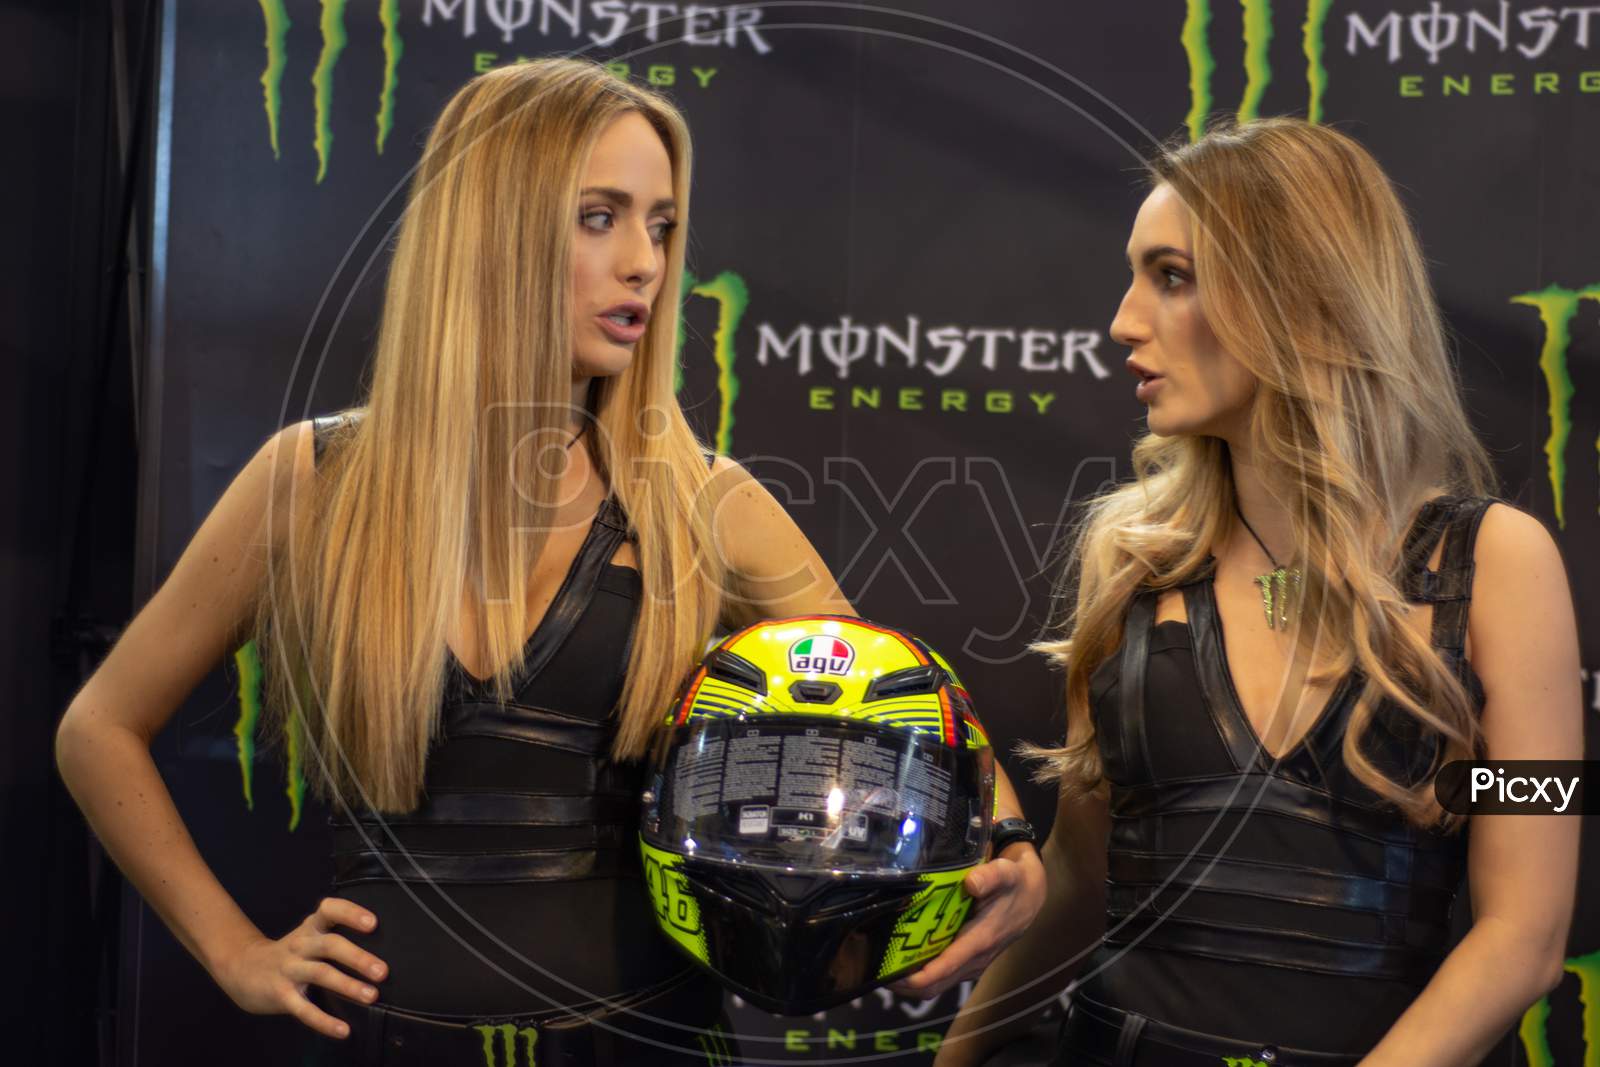 Beautiful Monster Energy girls pose with the motorcycle at Belgrade Car and Motor Show